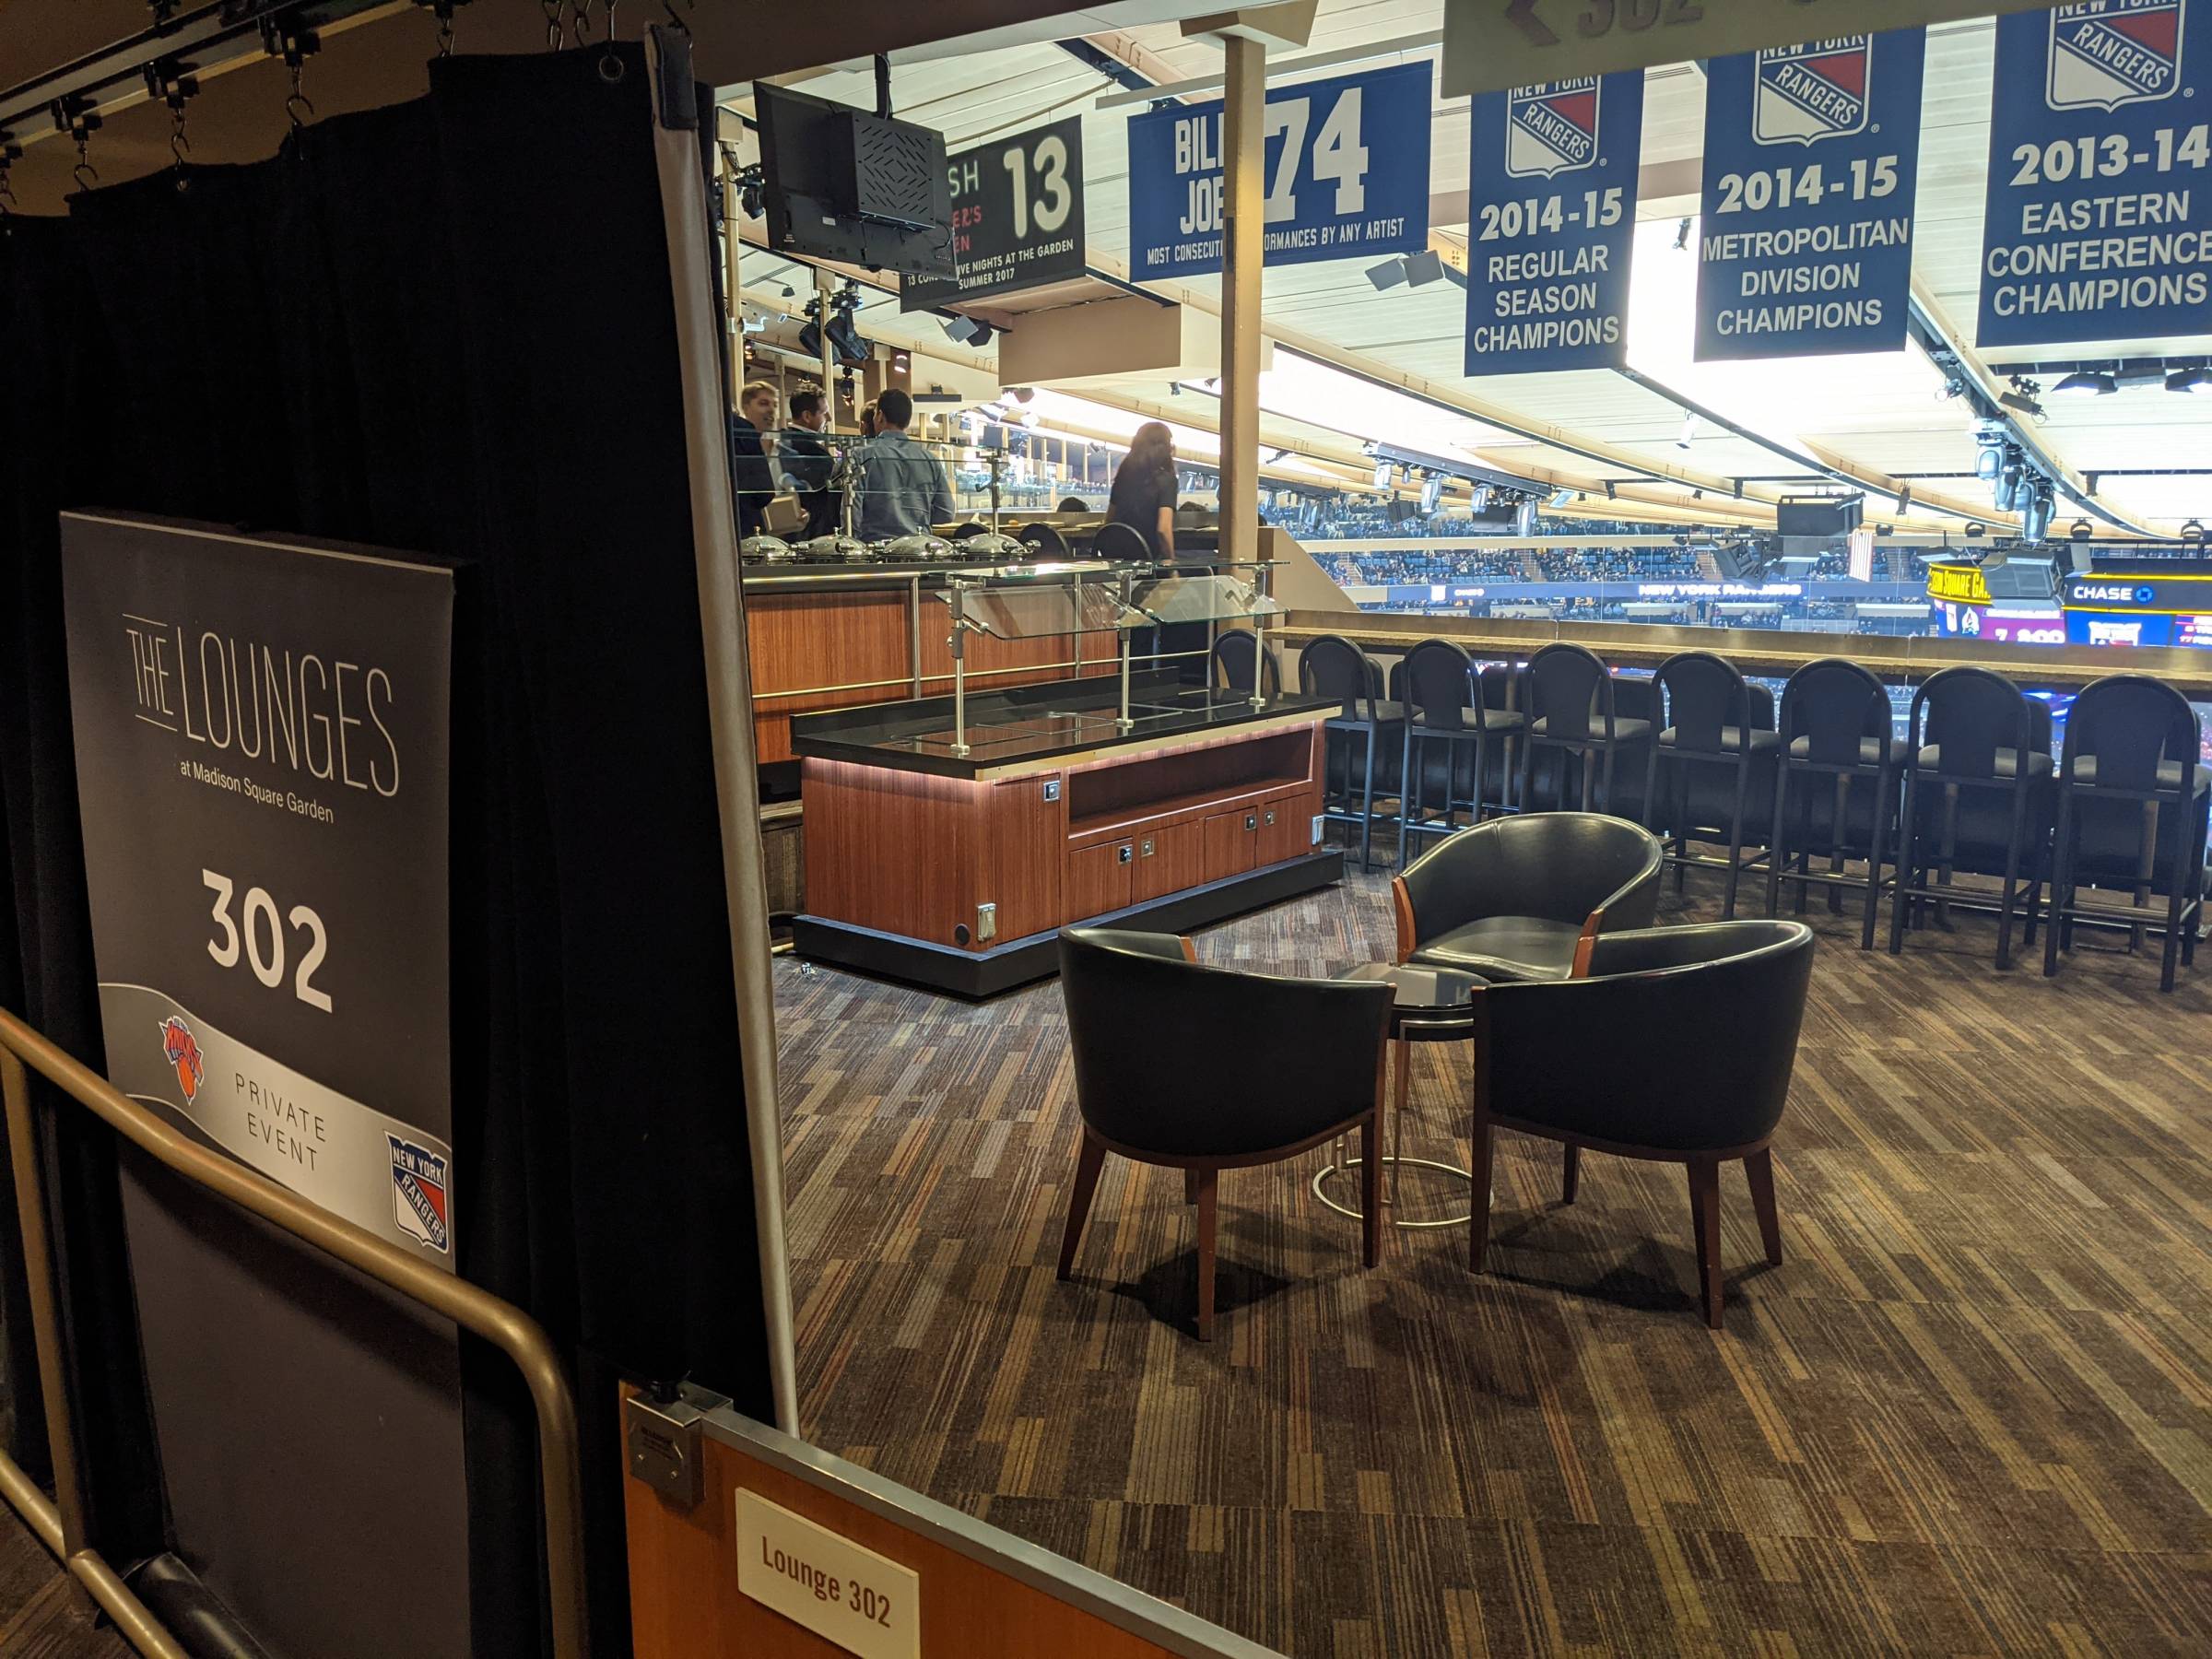 lounge 302 at msg